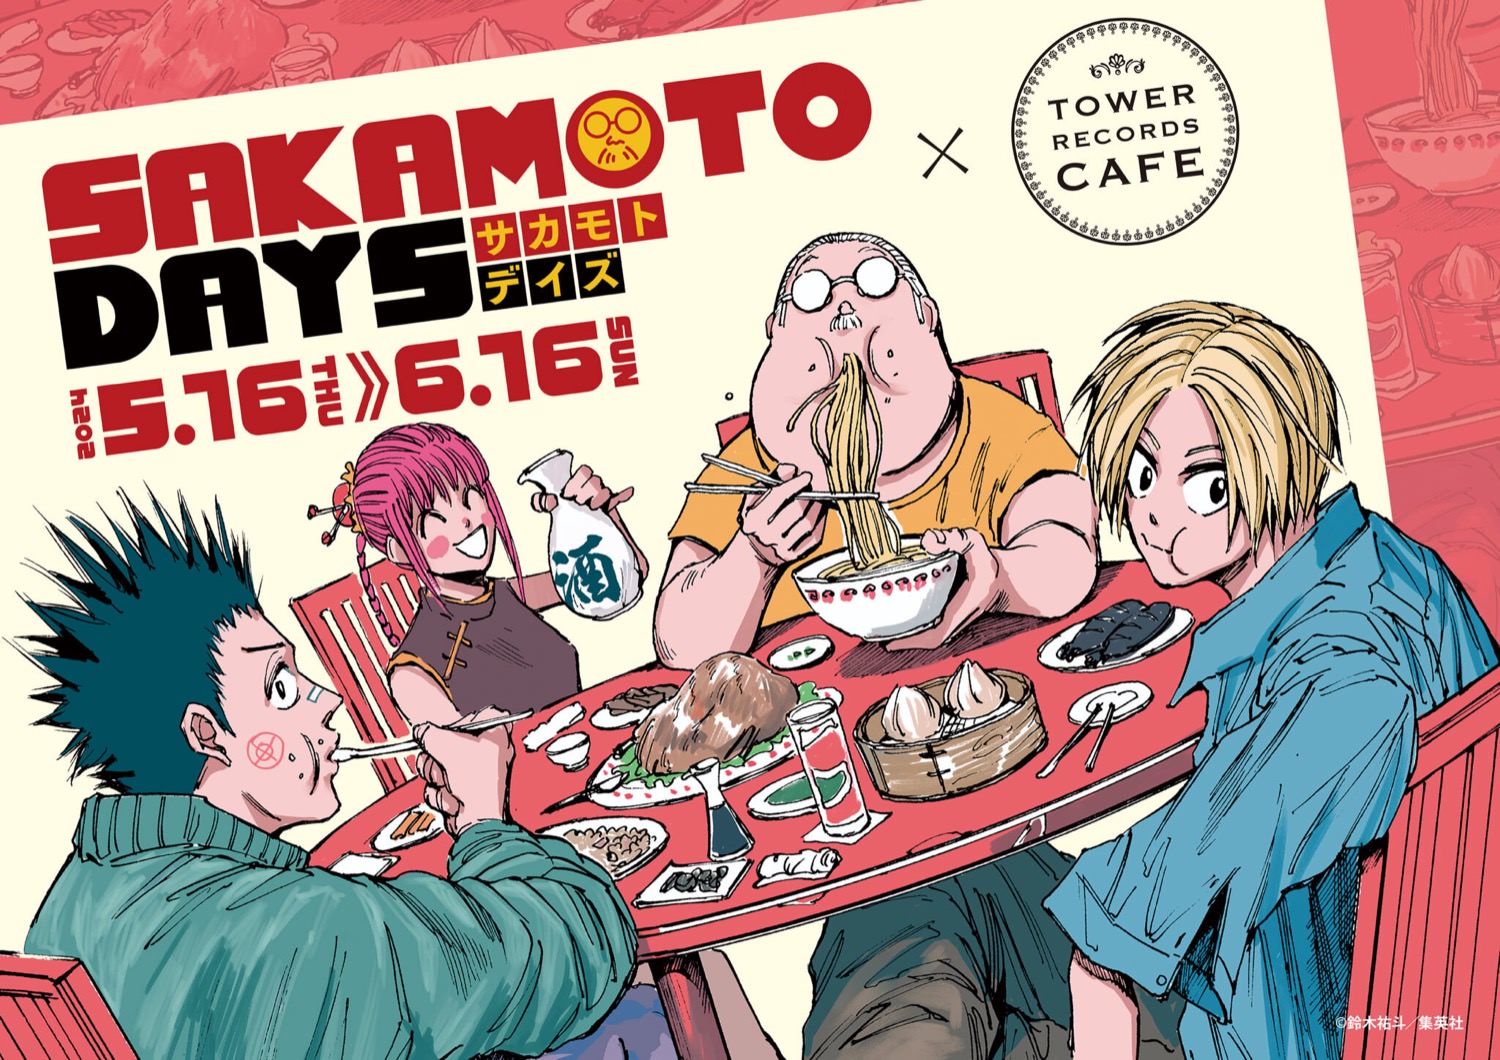 SAKAMOTO DAYS Cafe in TOWER RECORDS CAFE will be held from May 16 